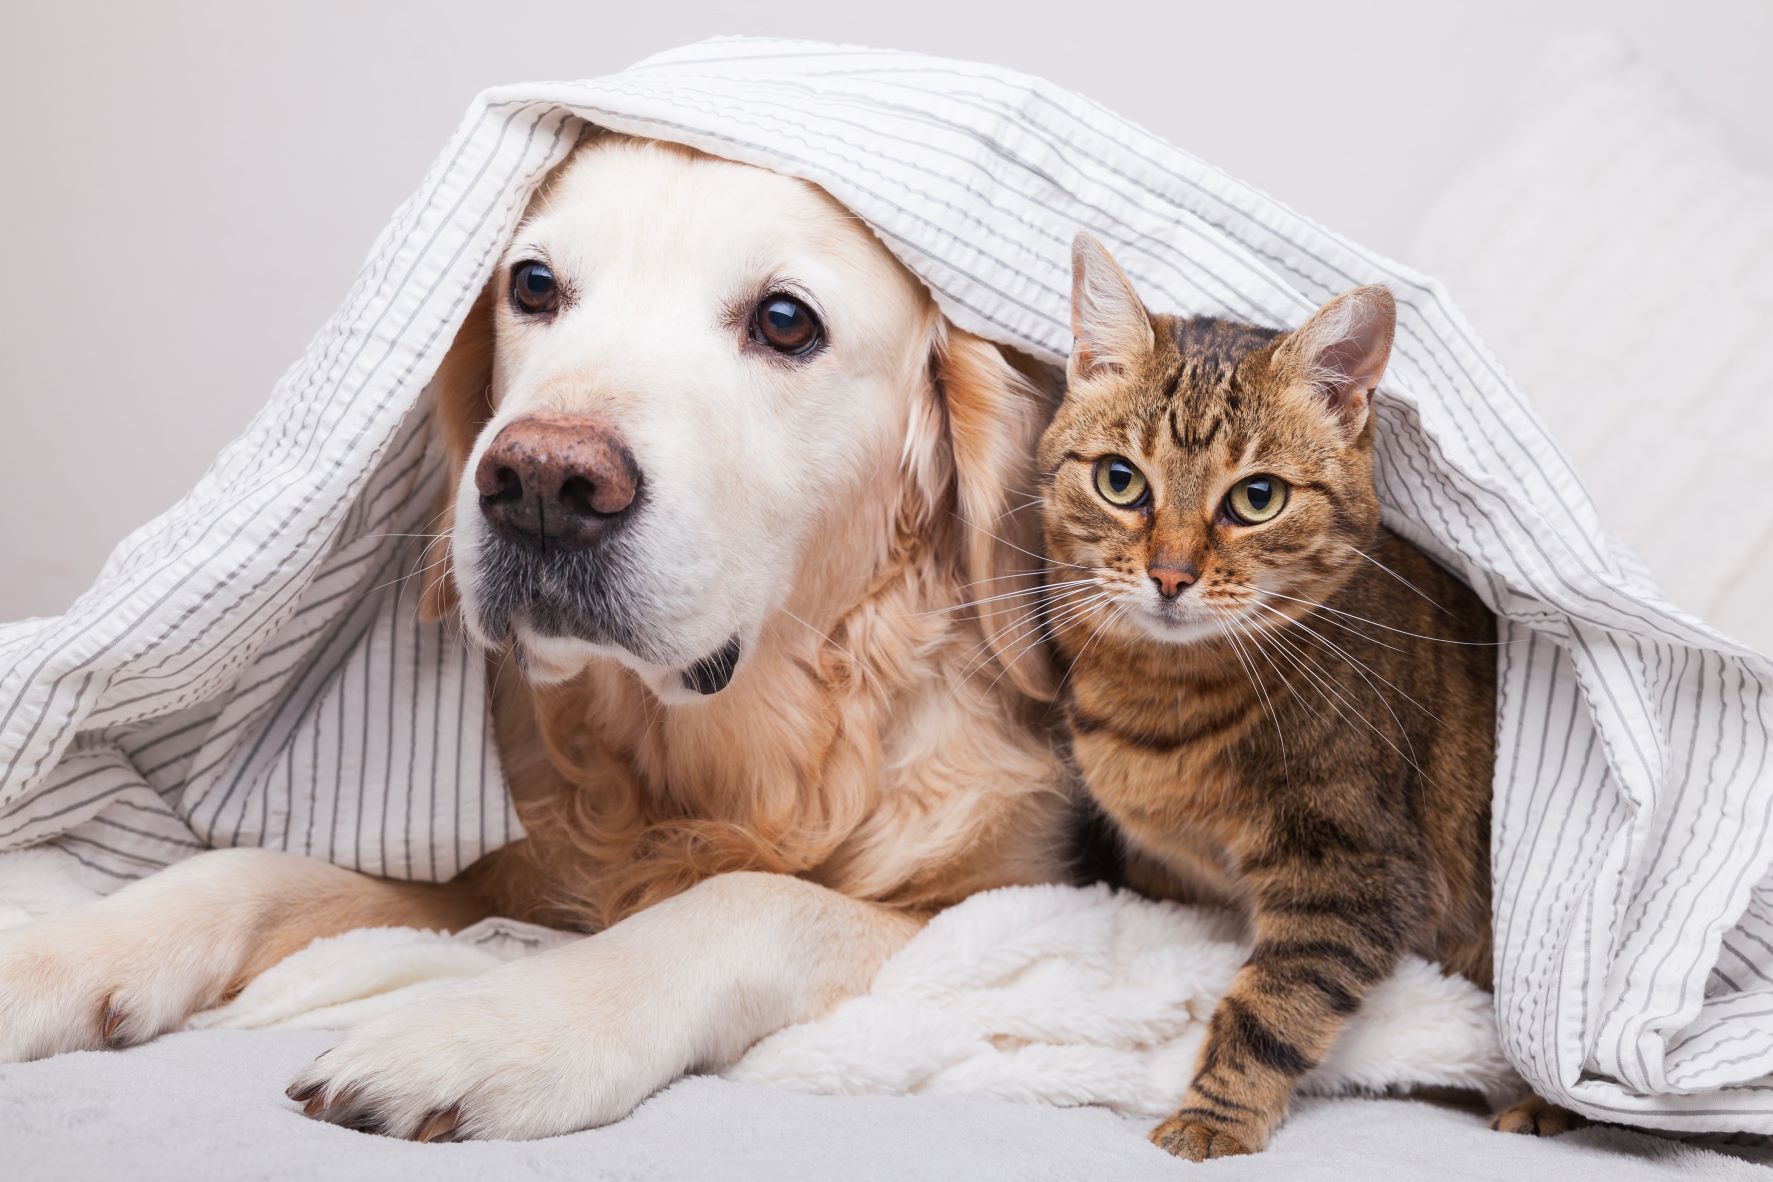 Dog and tabby cat cuddled up under a blanket